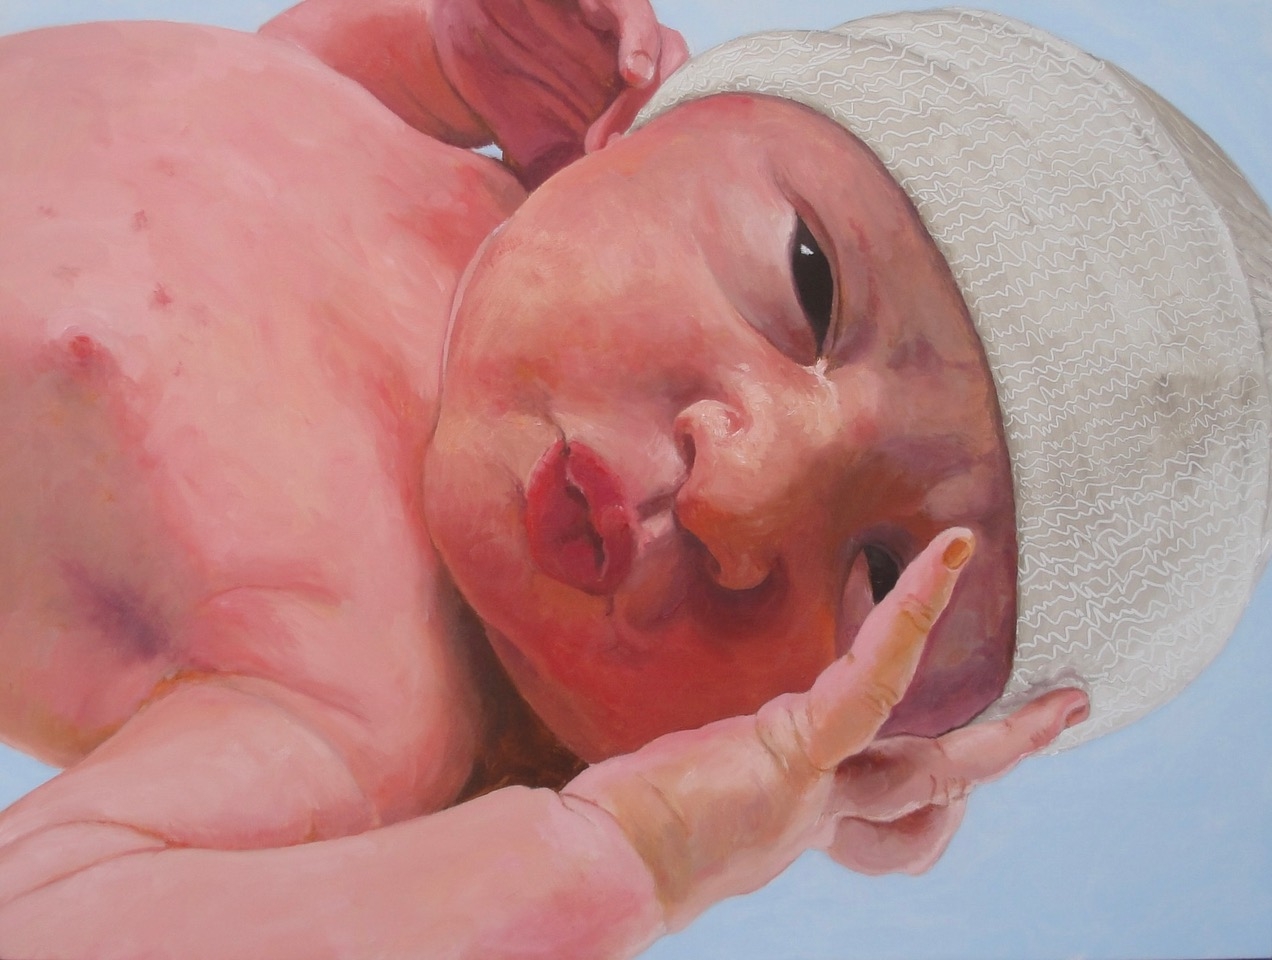 Donald Shambroom Painting entitled Ave Grace, Newborn showing a newborn baby